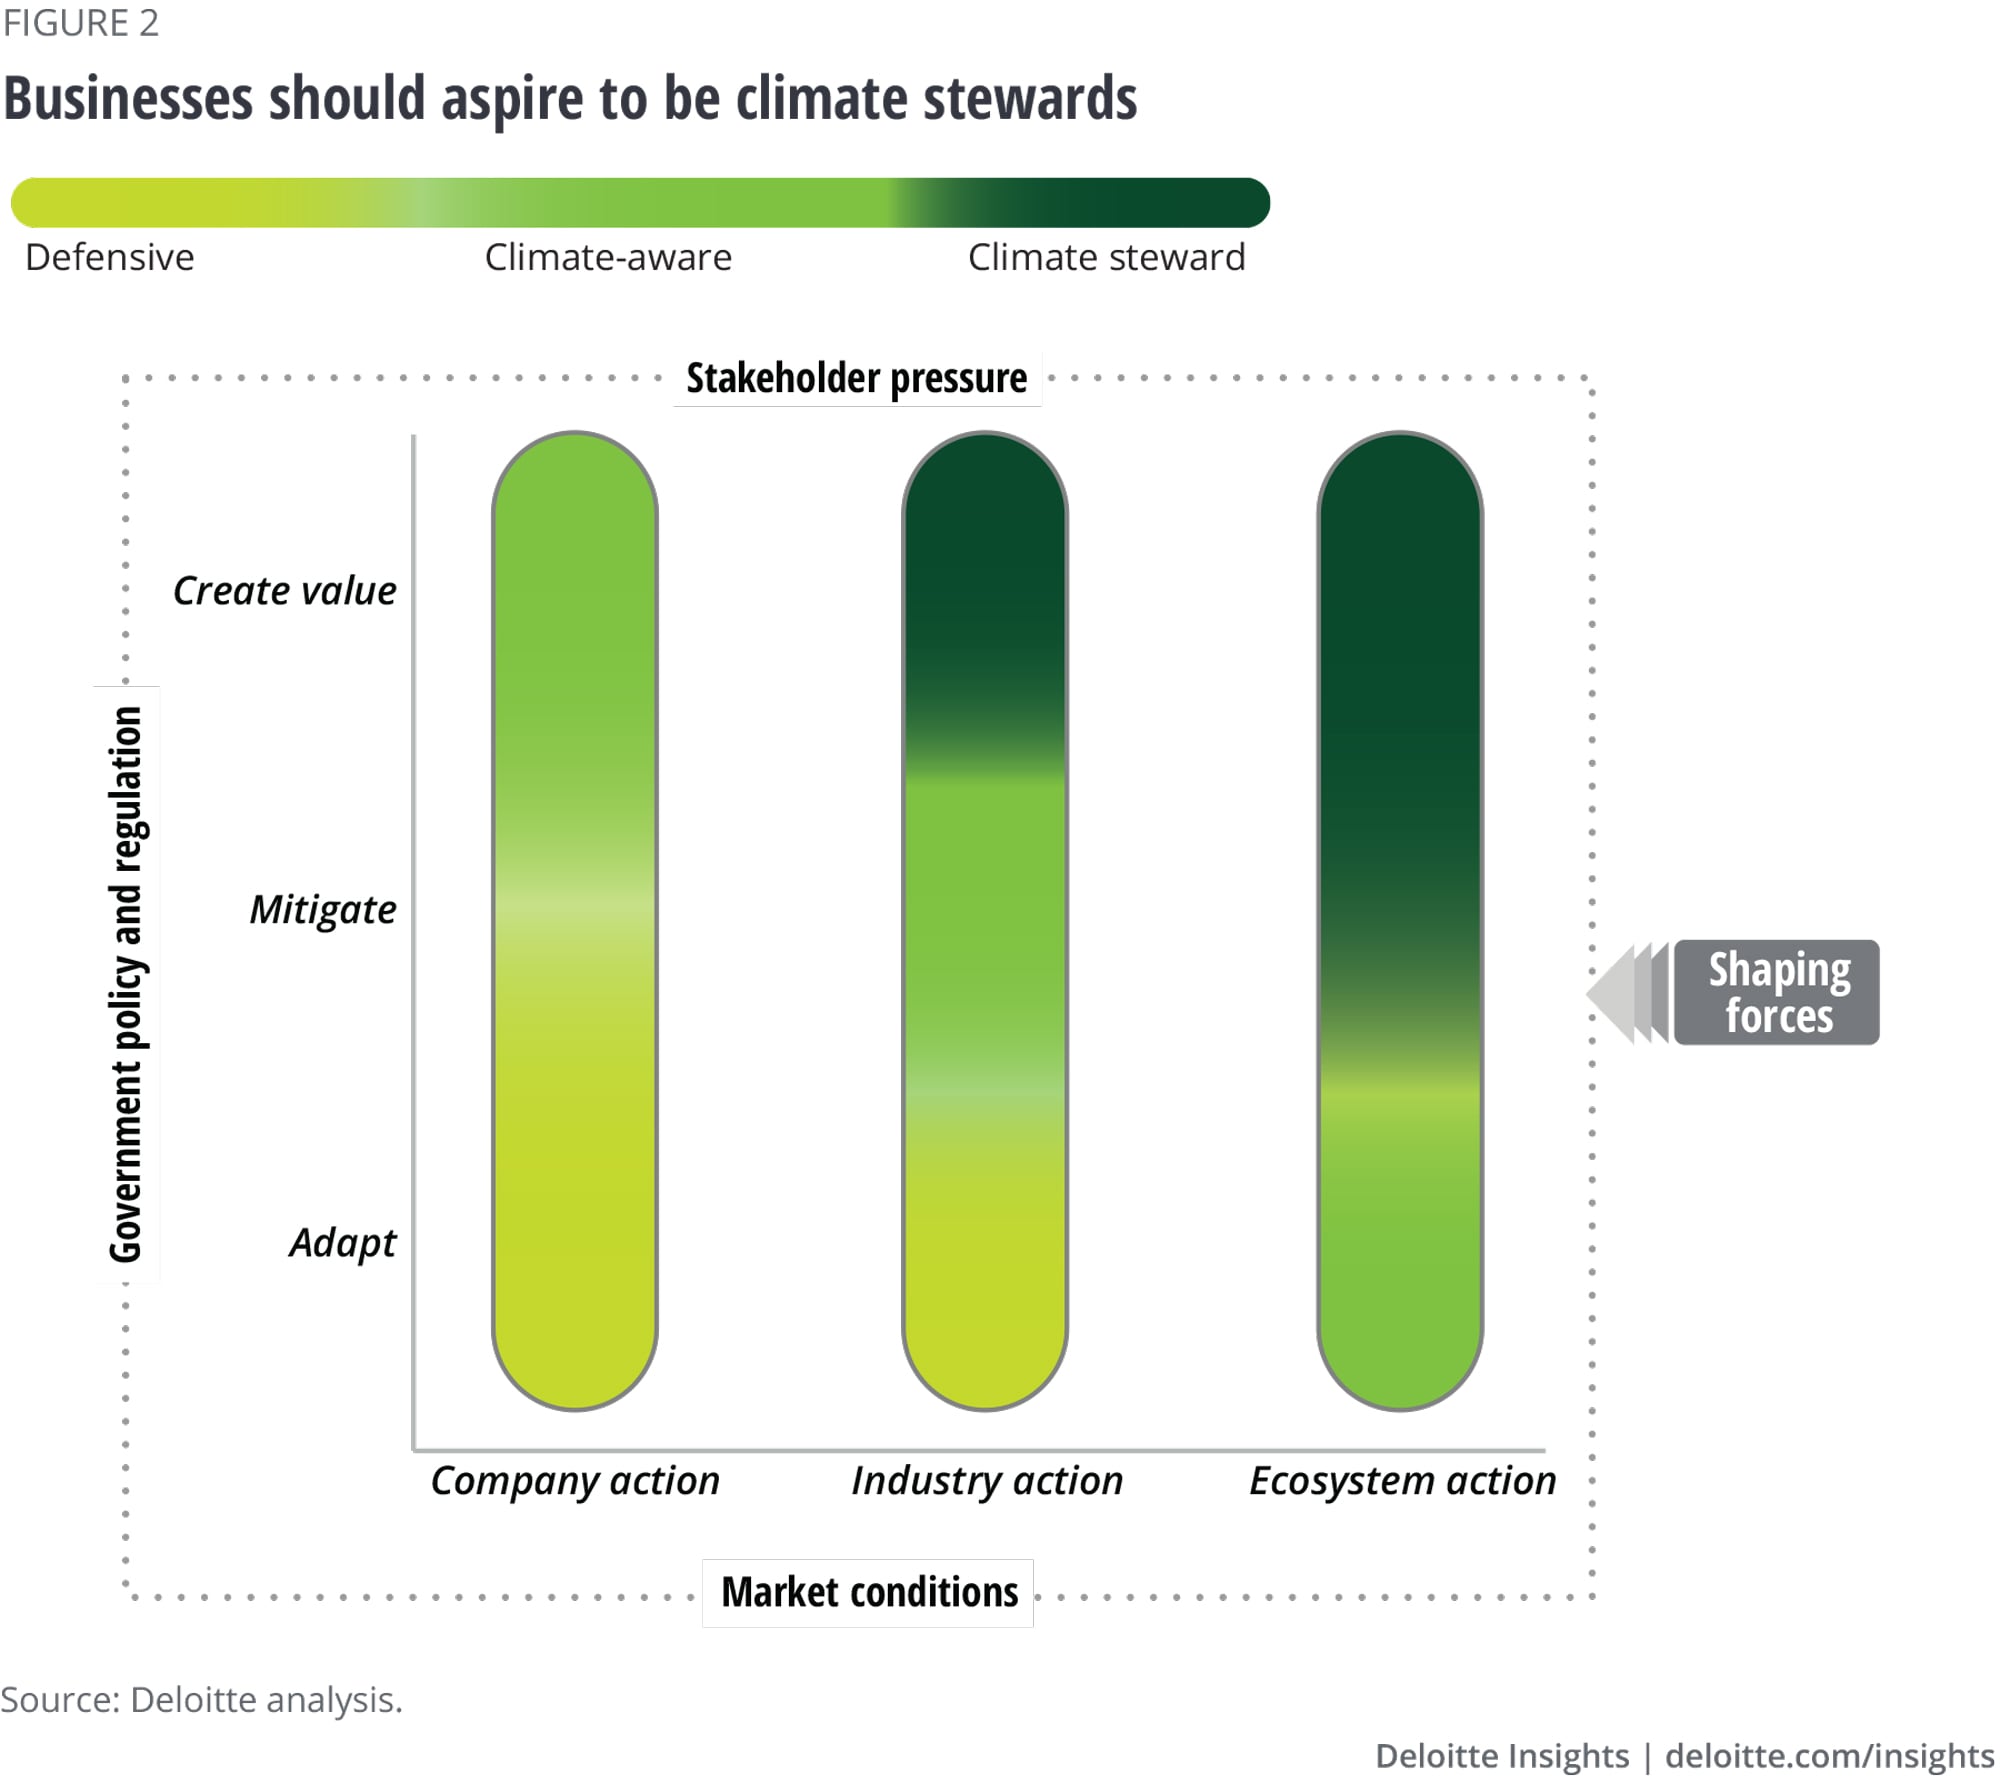 Businesses should aspire to embed climate throughout the organization